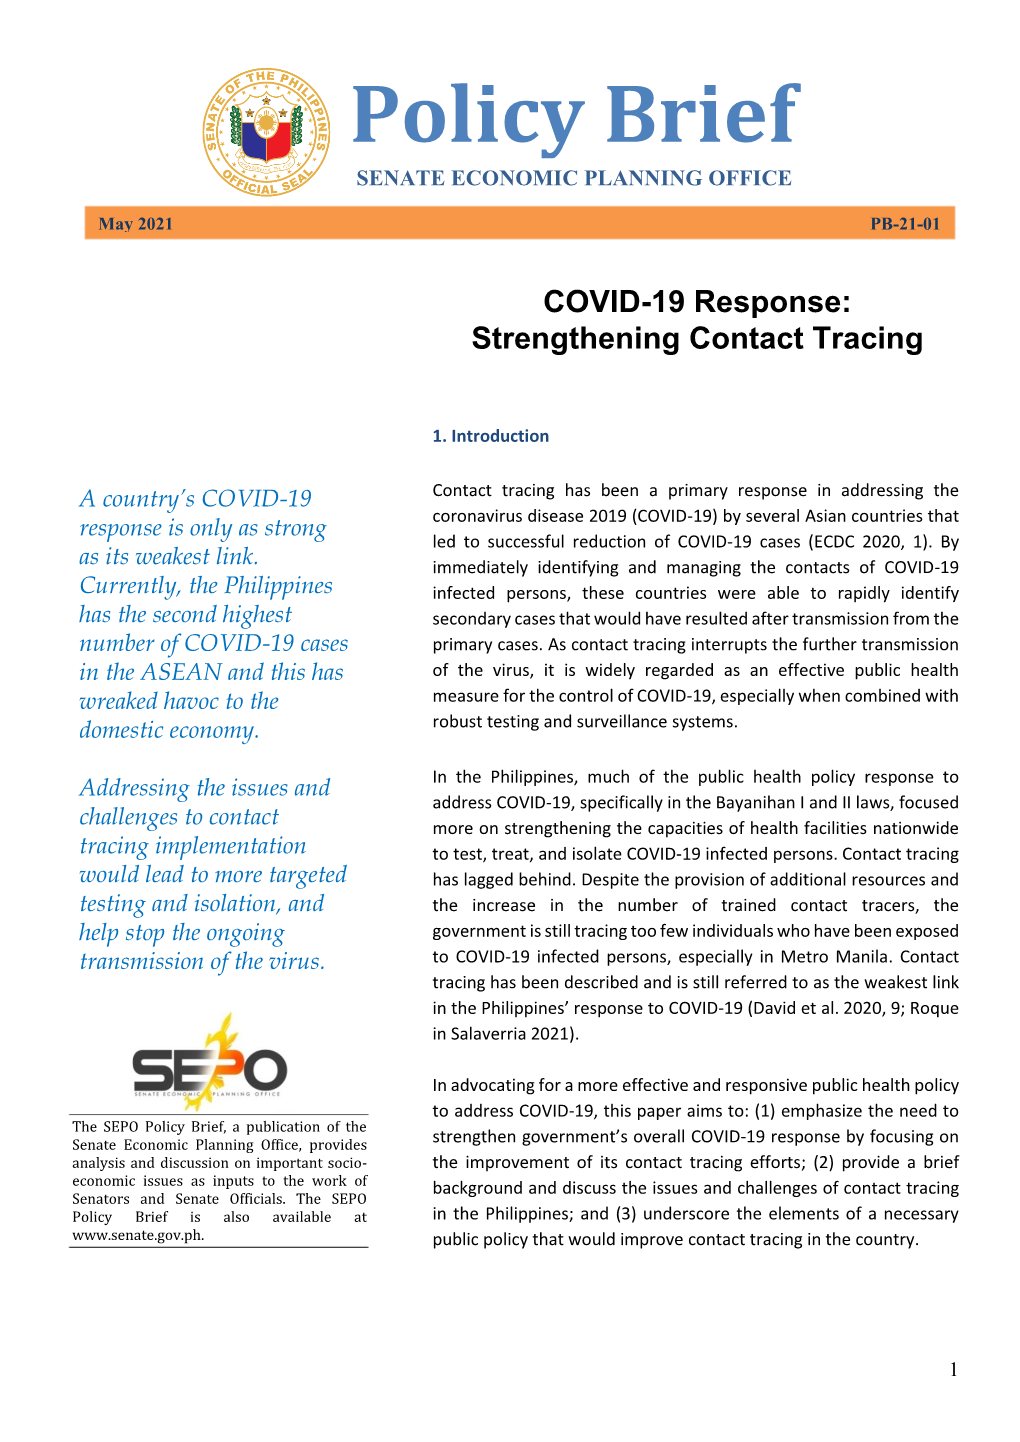 Policy Brief COVID-19 Response, Strengthening Contact Tracing.Pdf